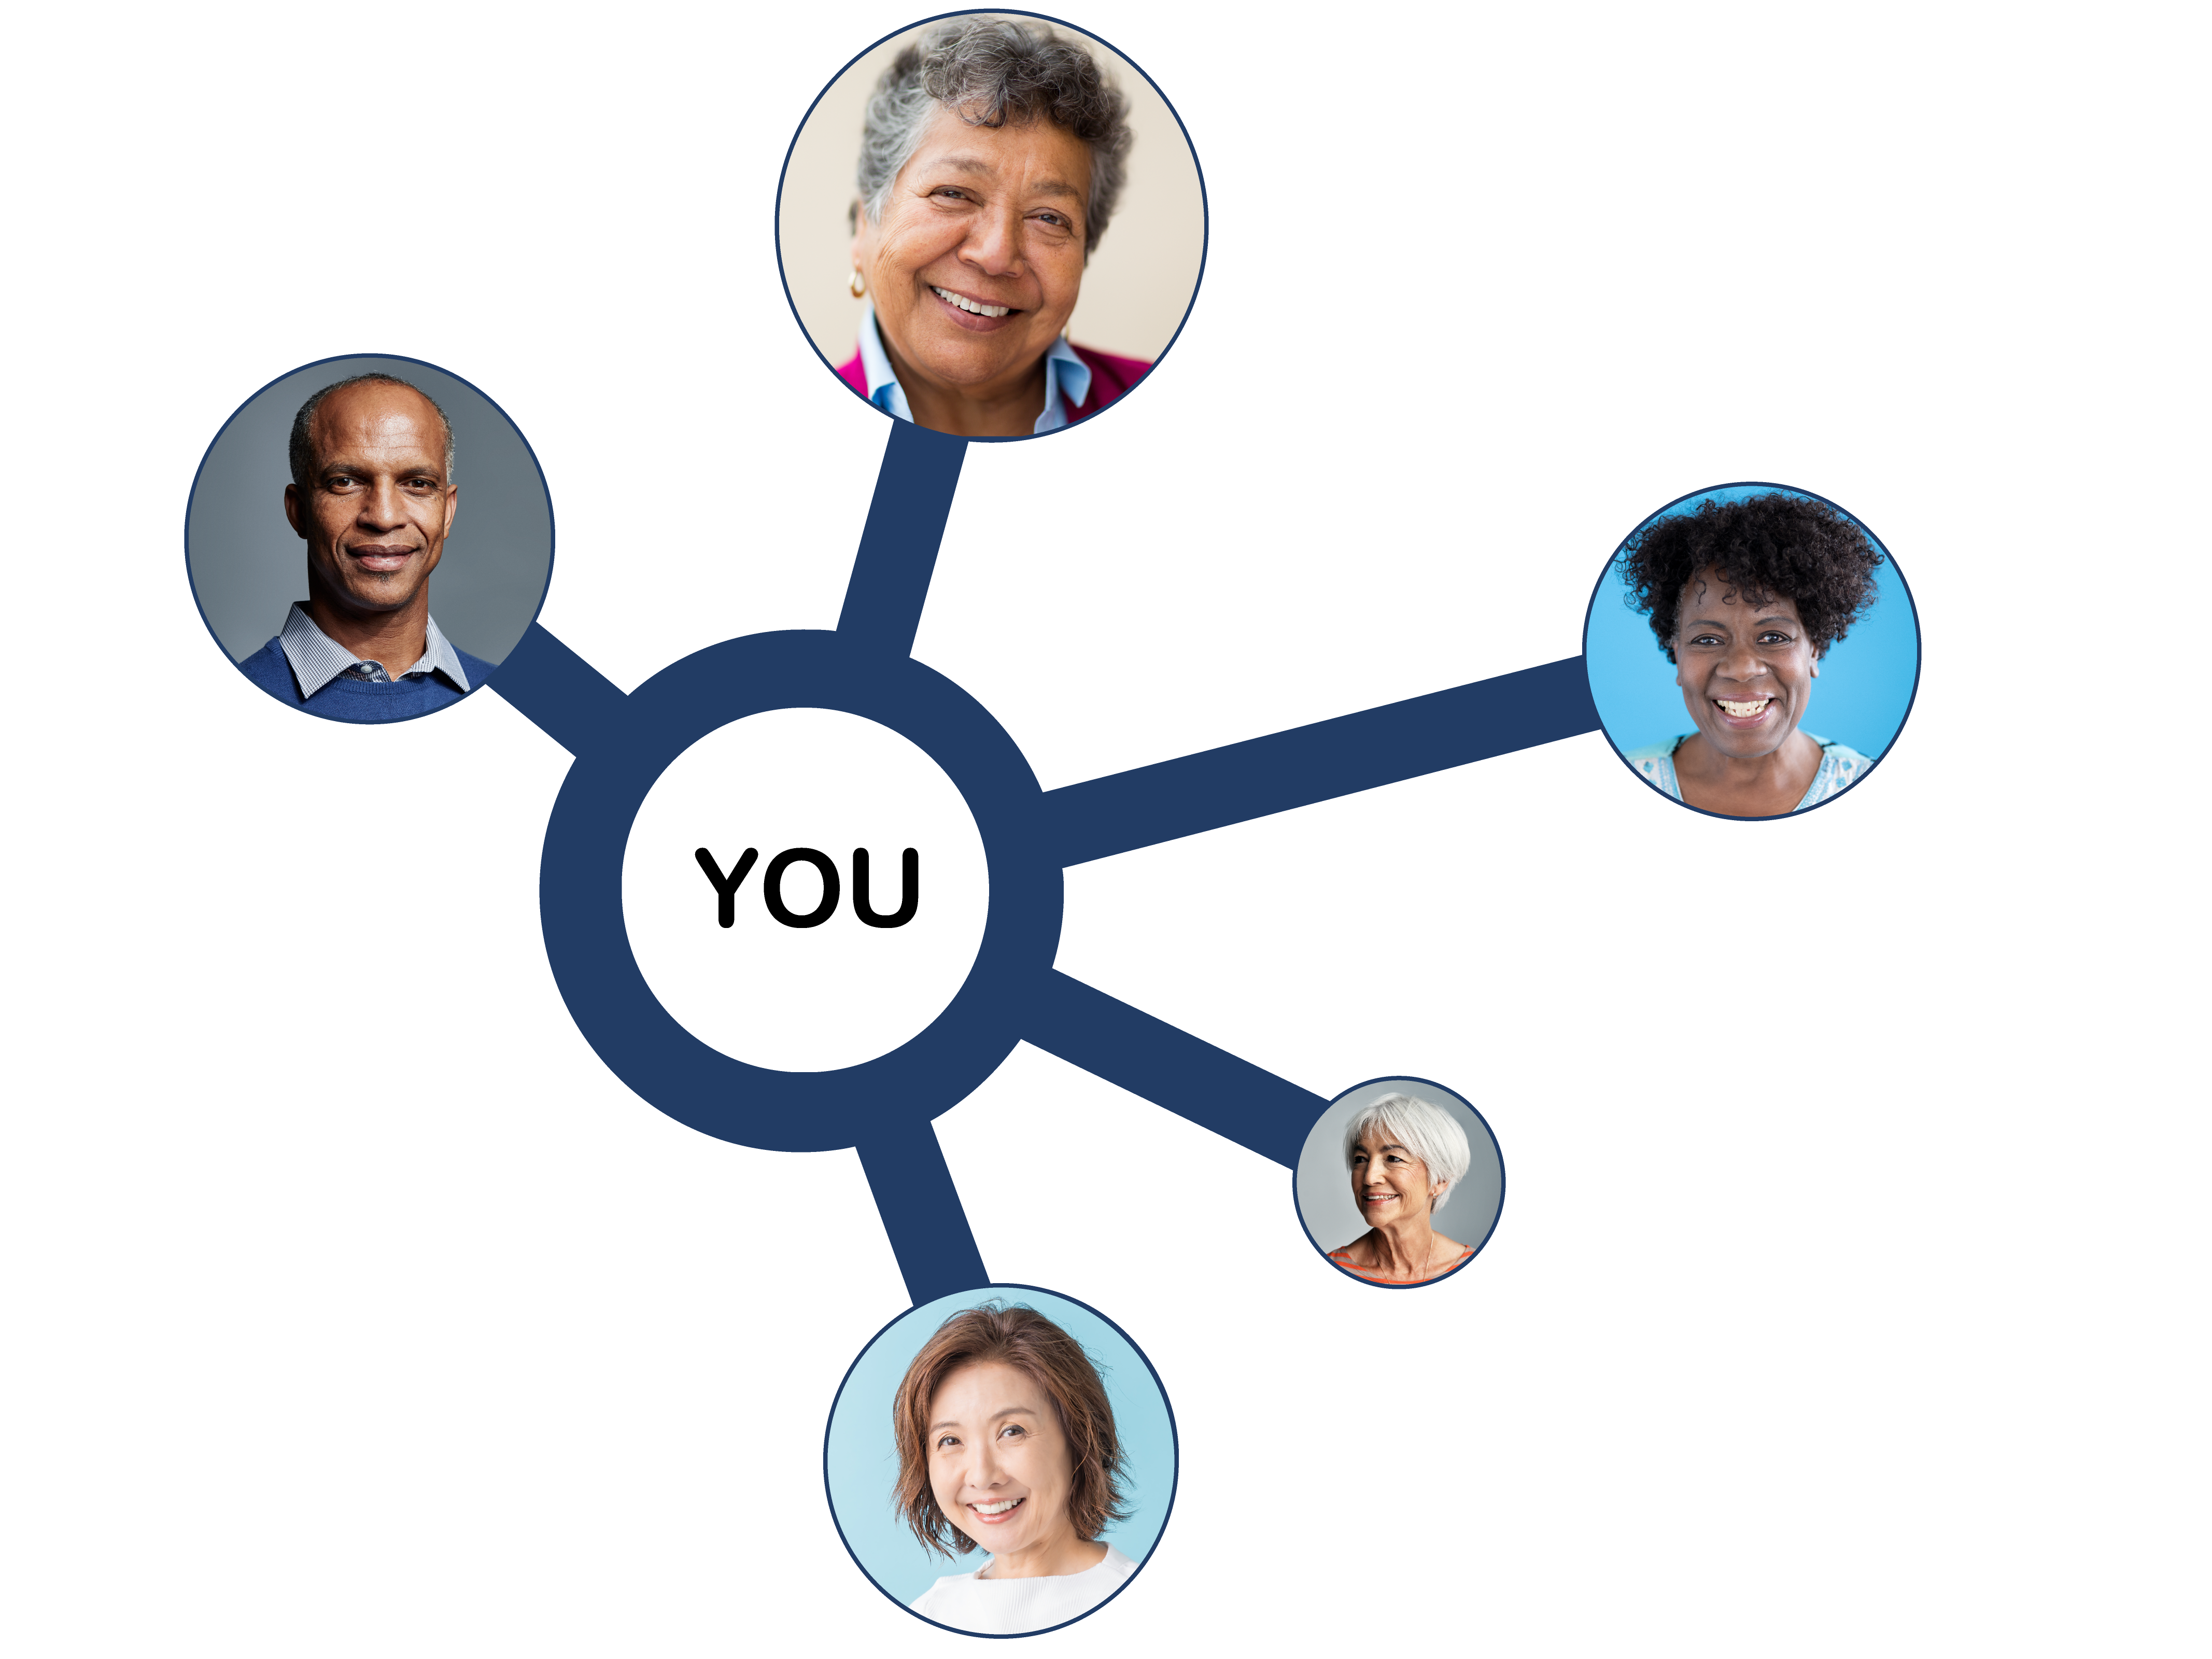 A diagram with "You" written at the center, connected by lines to headshot photos of 5 smiling diverse individuals of various ages, genders, and ethnicities.